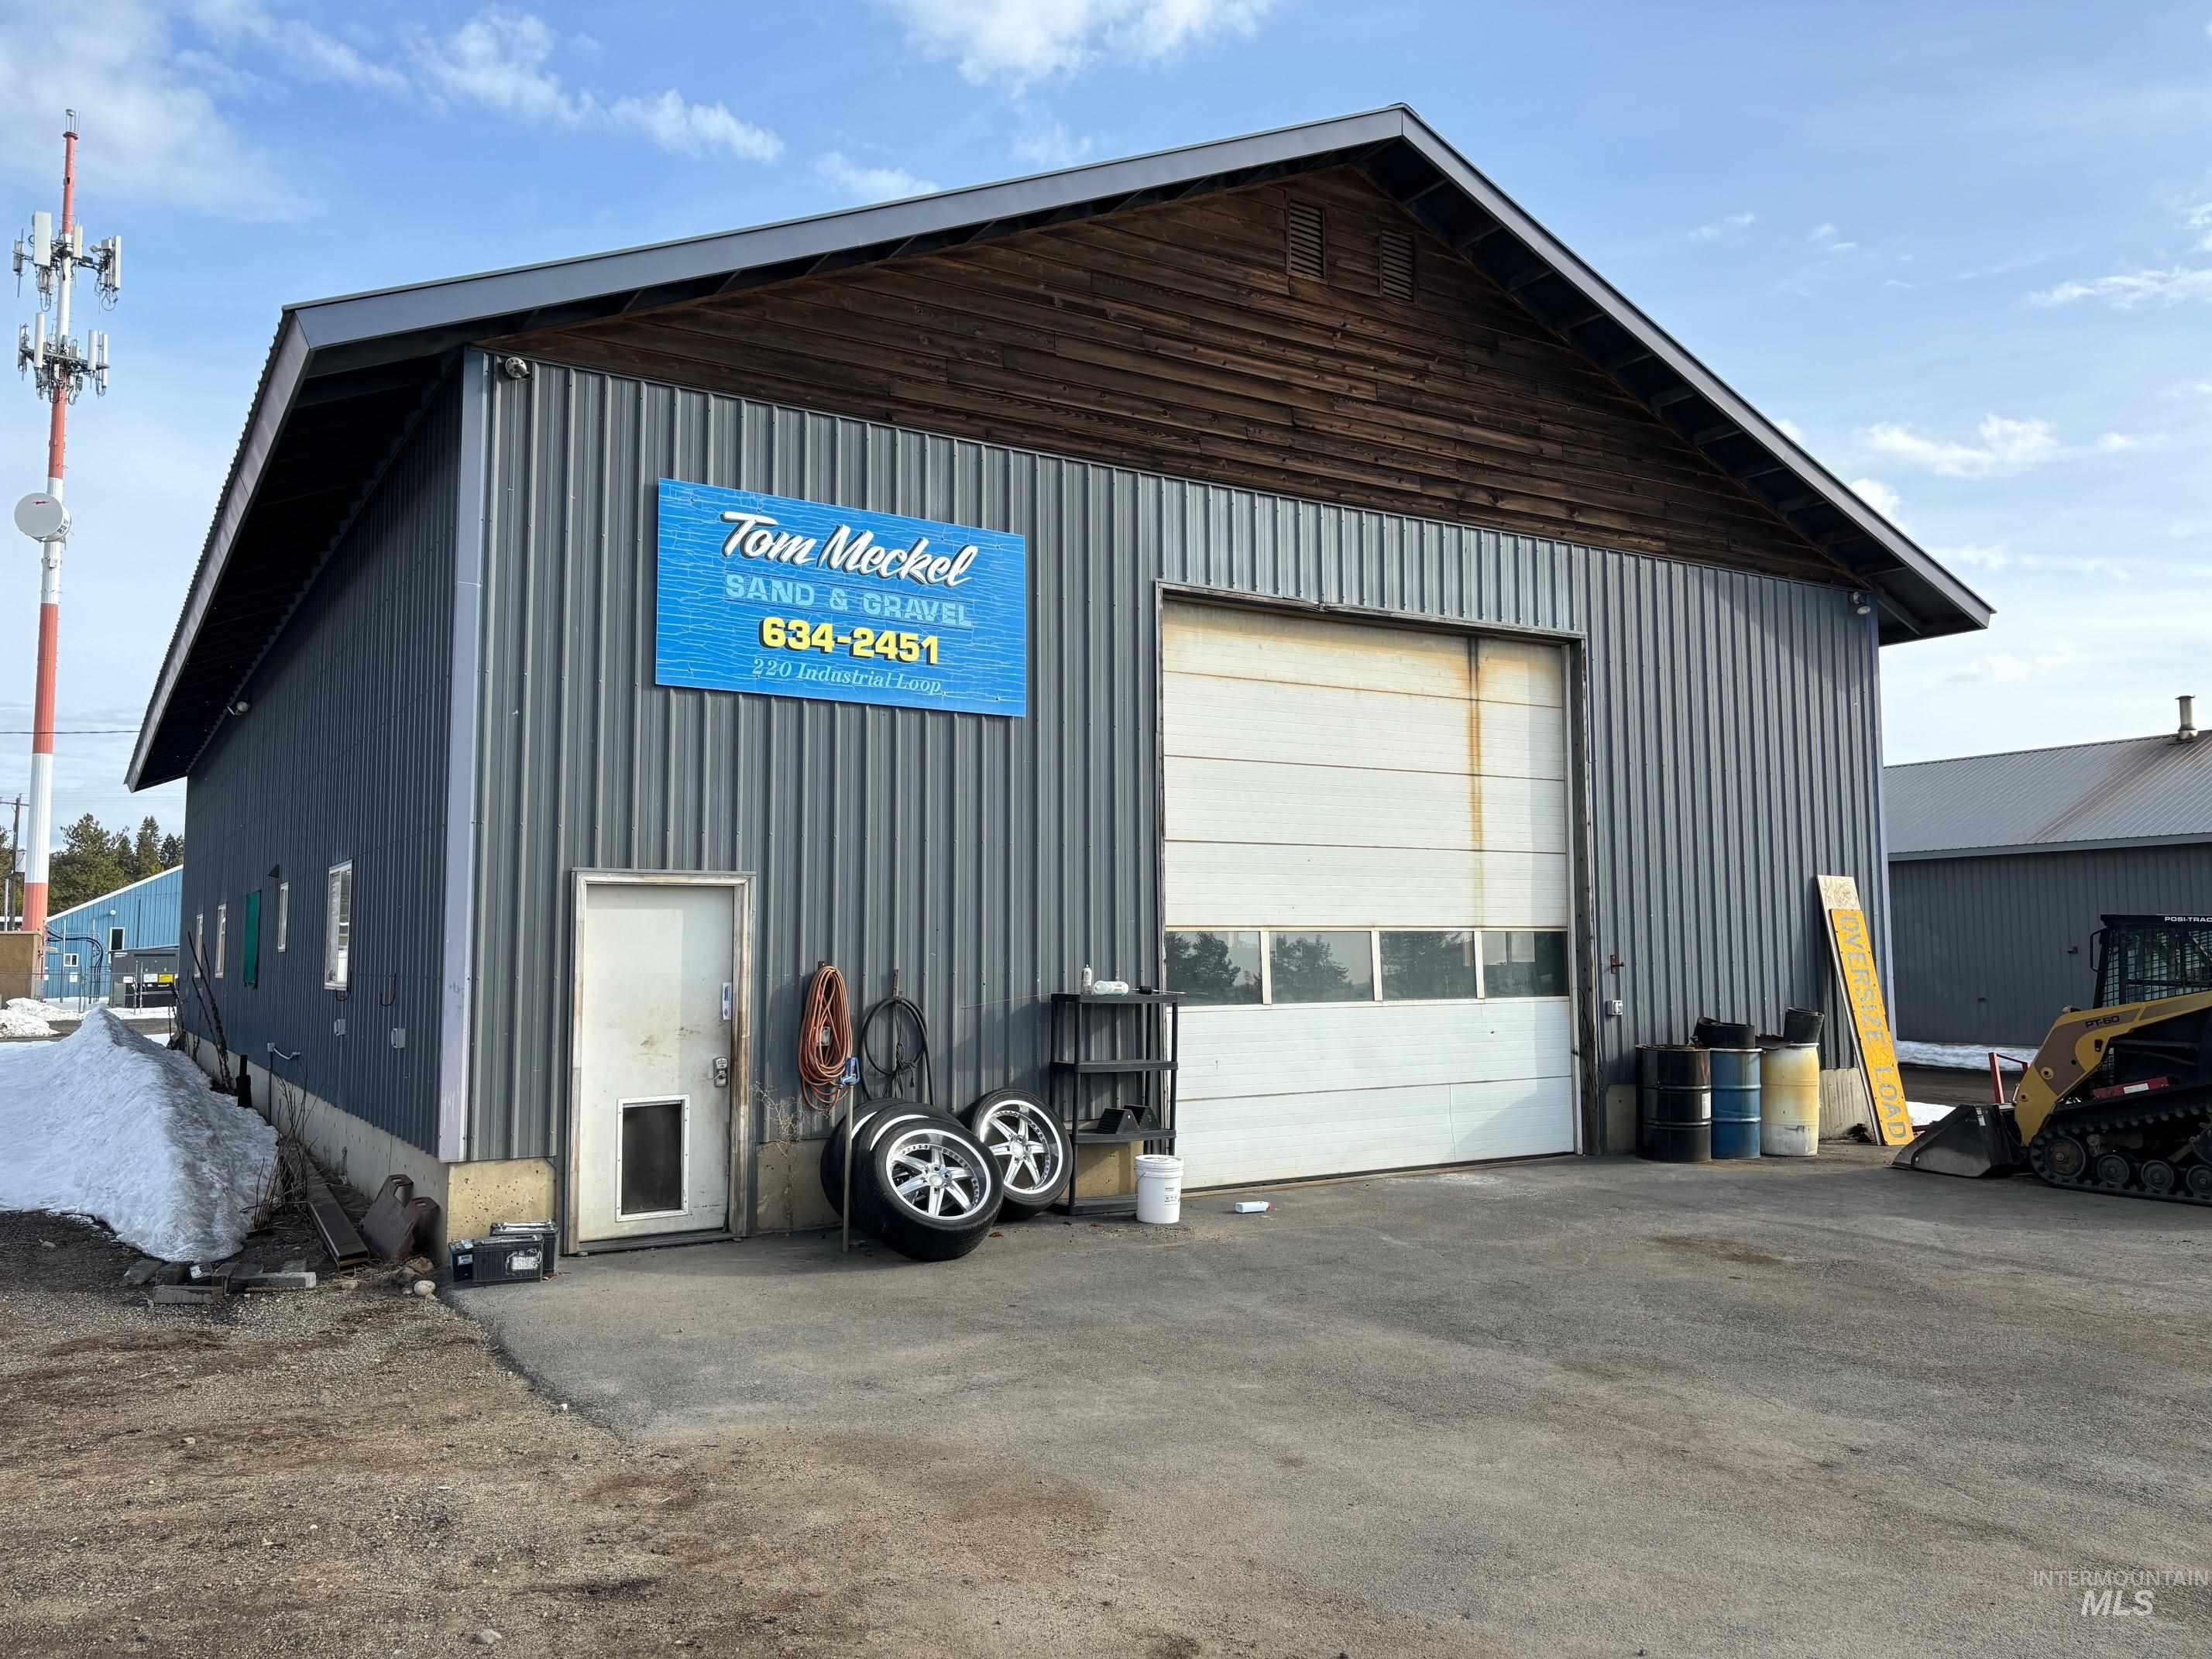 224 Industrial Loop, McCall, Idaho 83638, Business/Commercial For Sale, Price $1,785,000,MLS 98904312